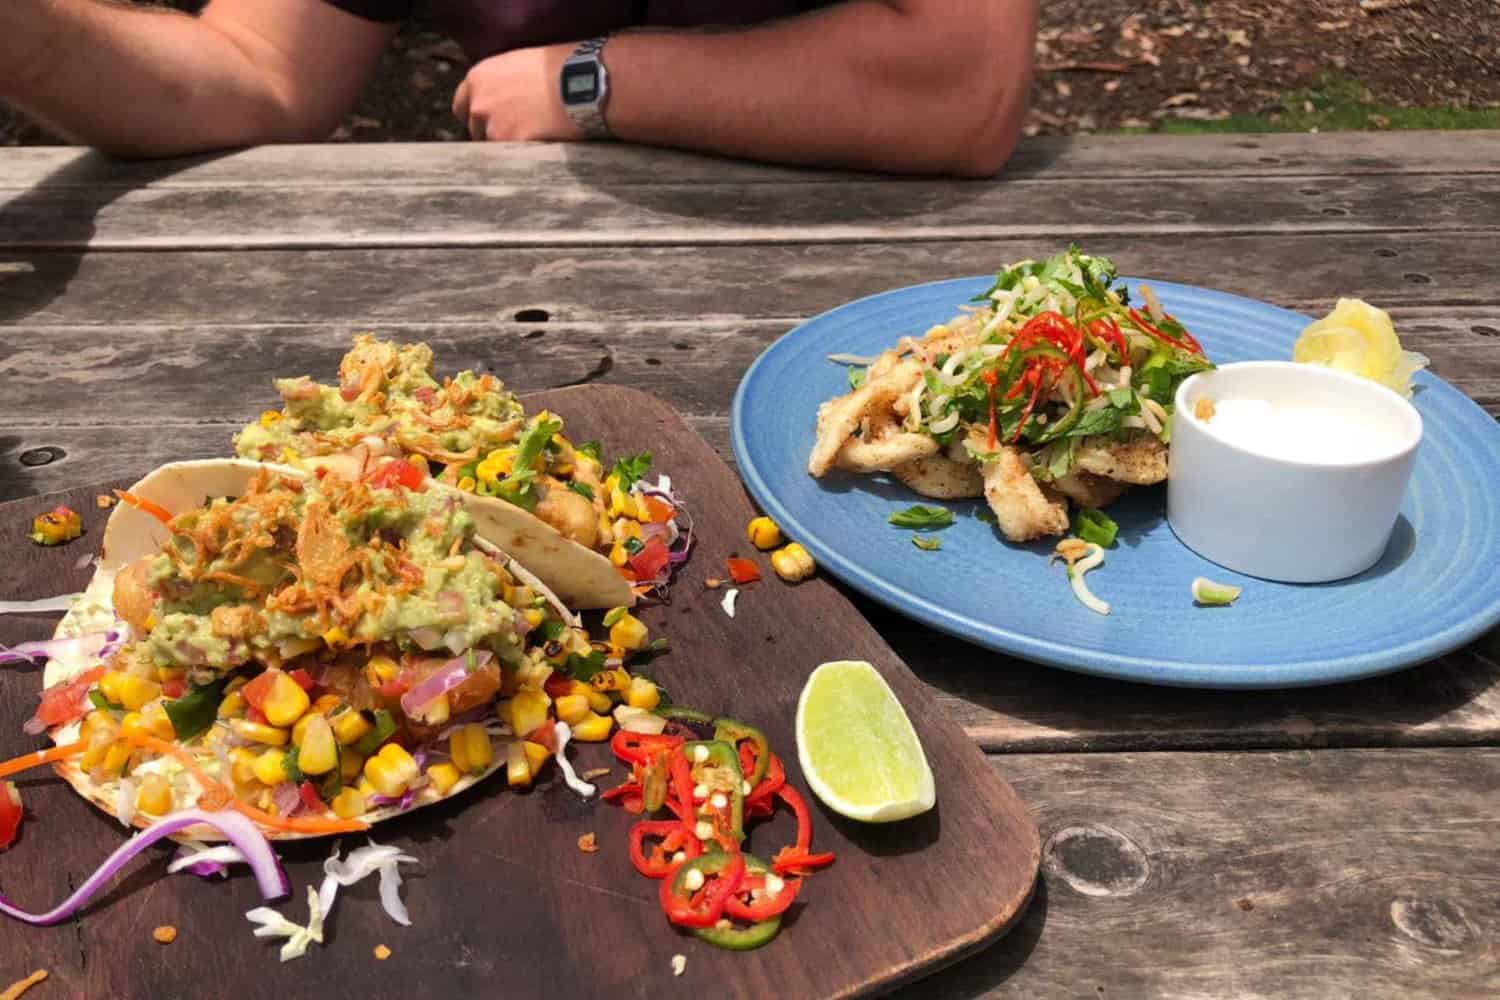 Image of two plates of food ordered at a local Margaret River restaurant, one being tacos and the other being a chicken dish, illustrating the difference between hotel and restaurant cuisine in Margaret River.